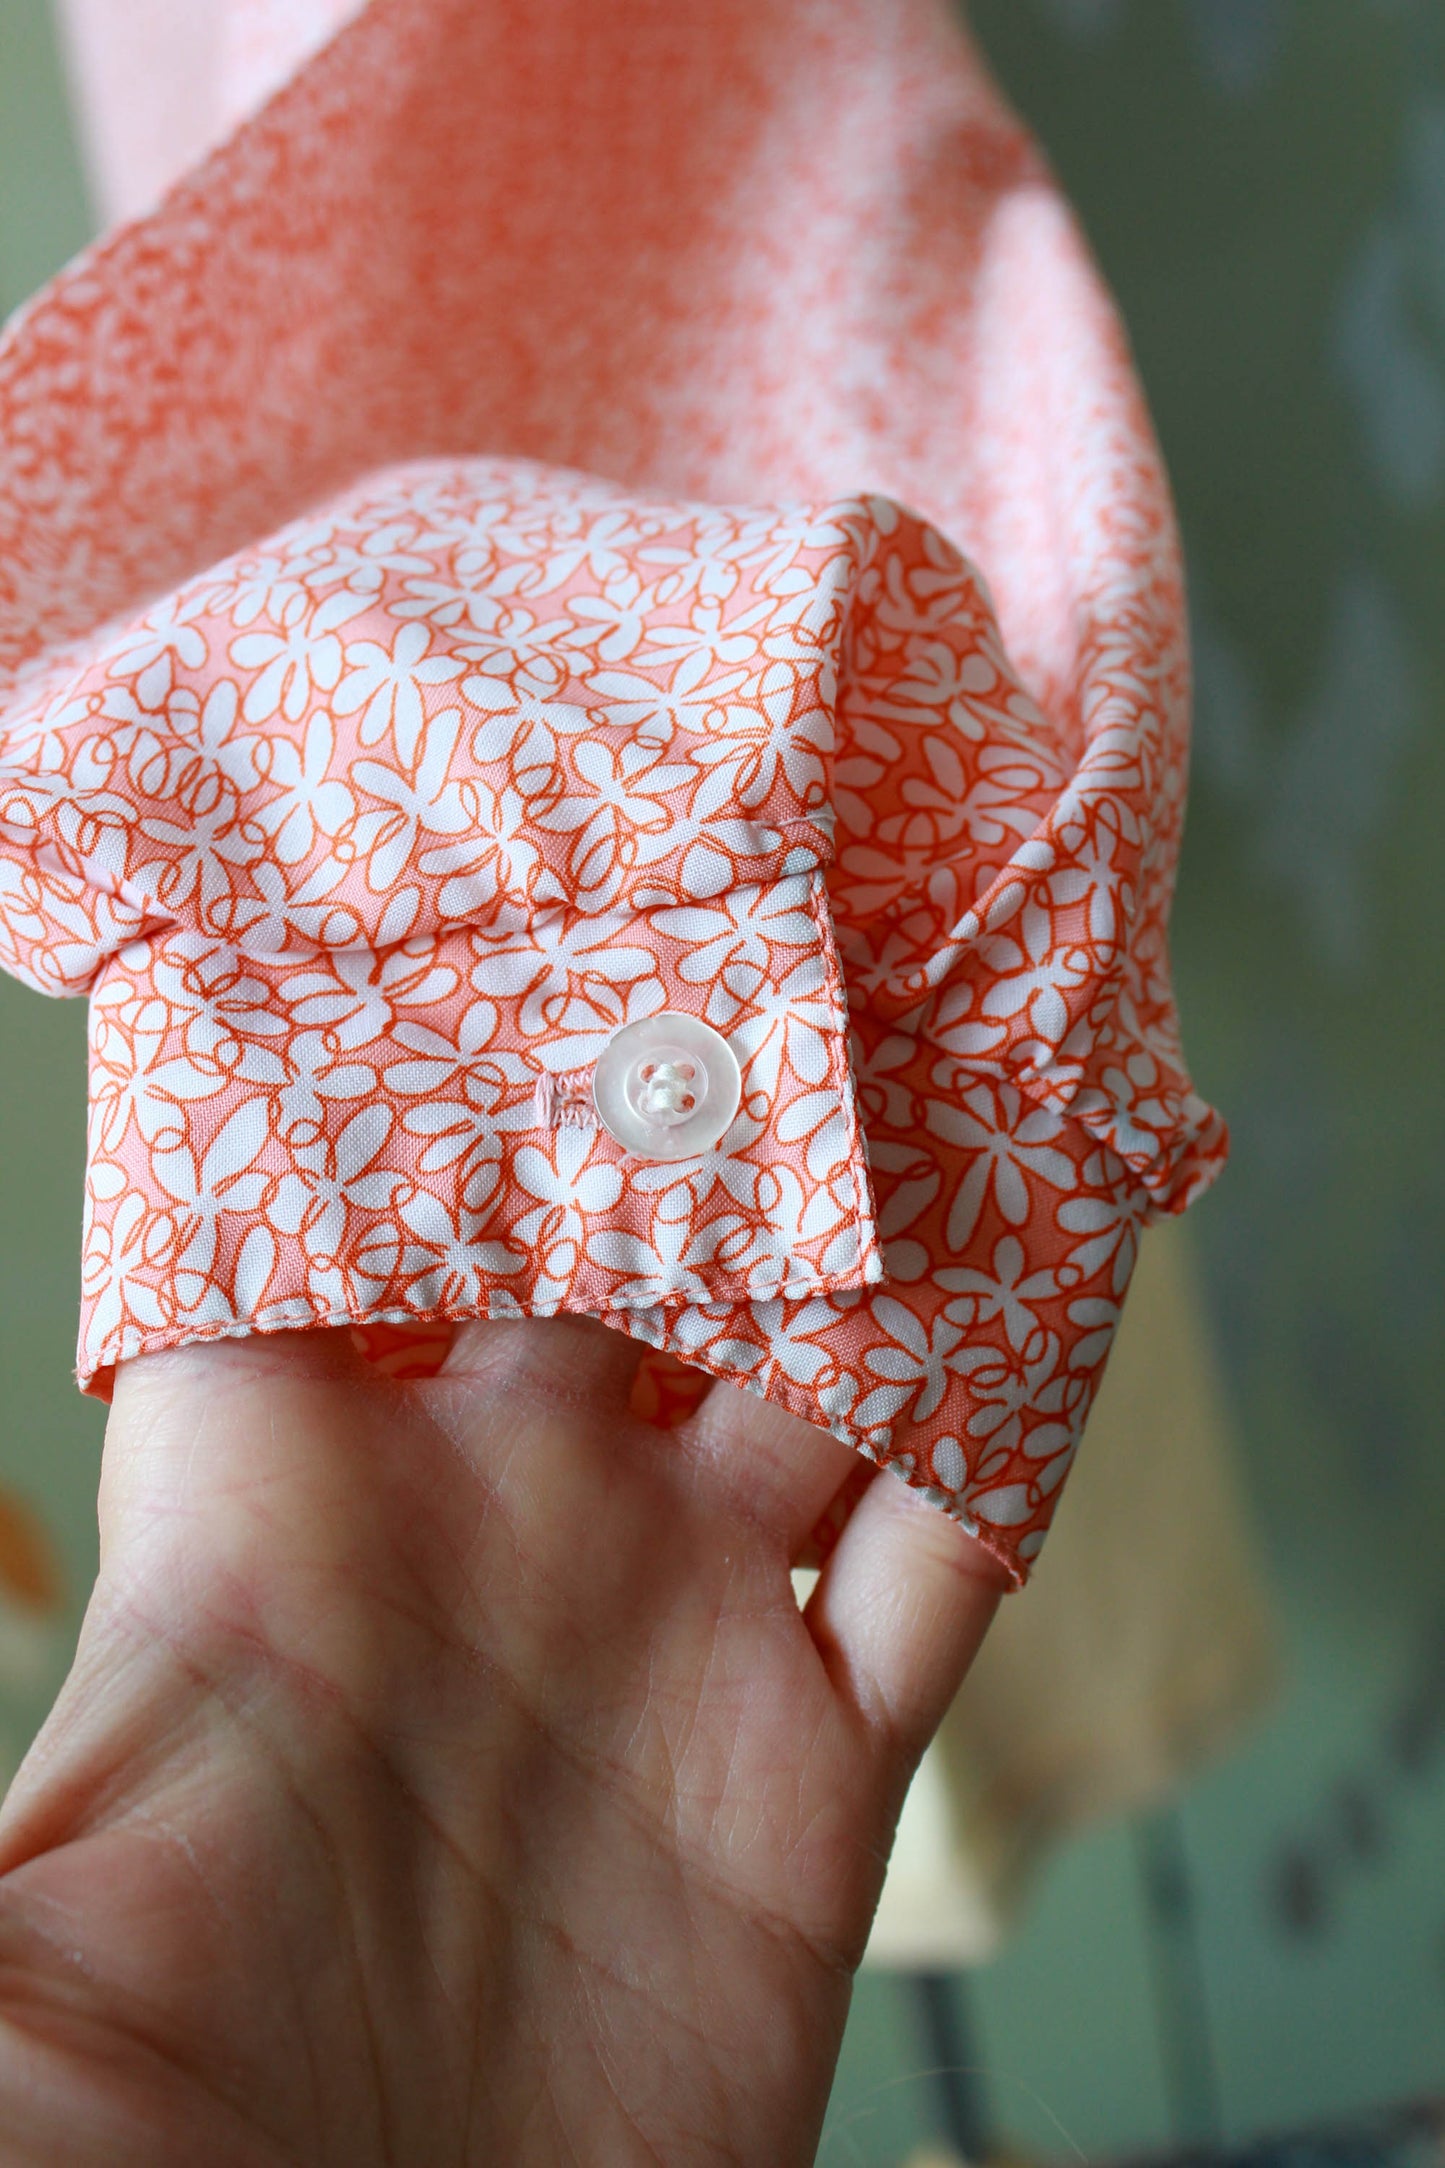 1980s holt renfrew orange and white micro floral print blouse with collar and tie at the neck, long sleeves vintage